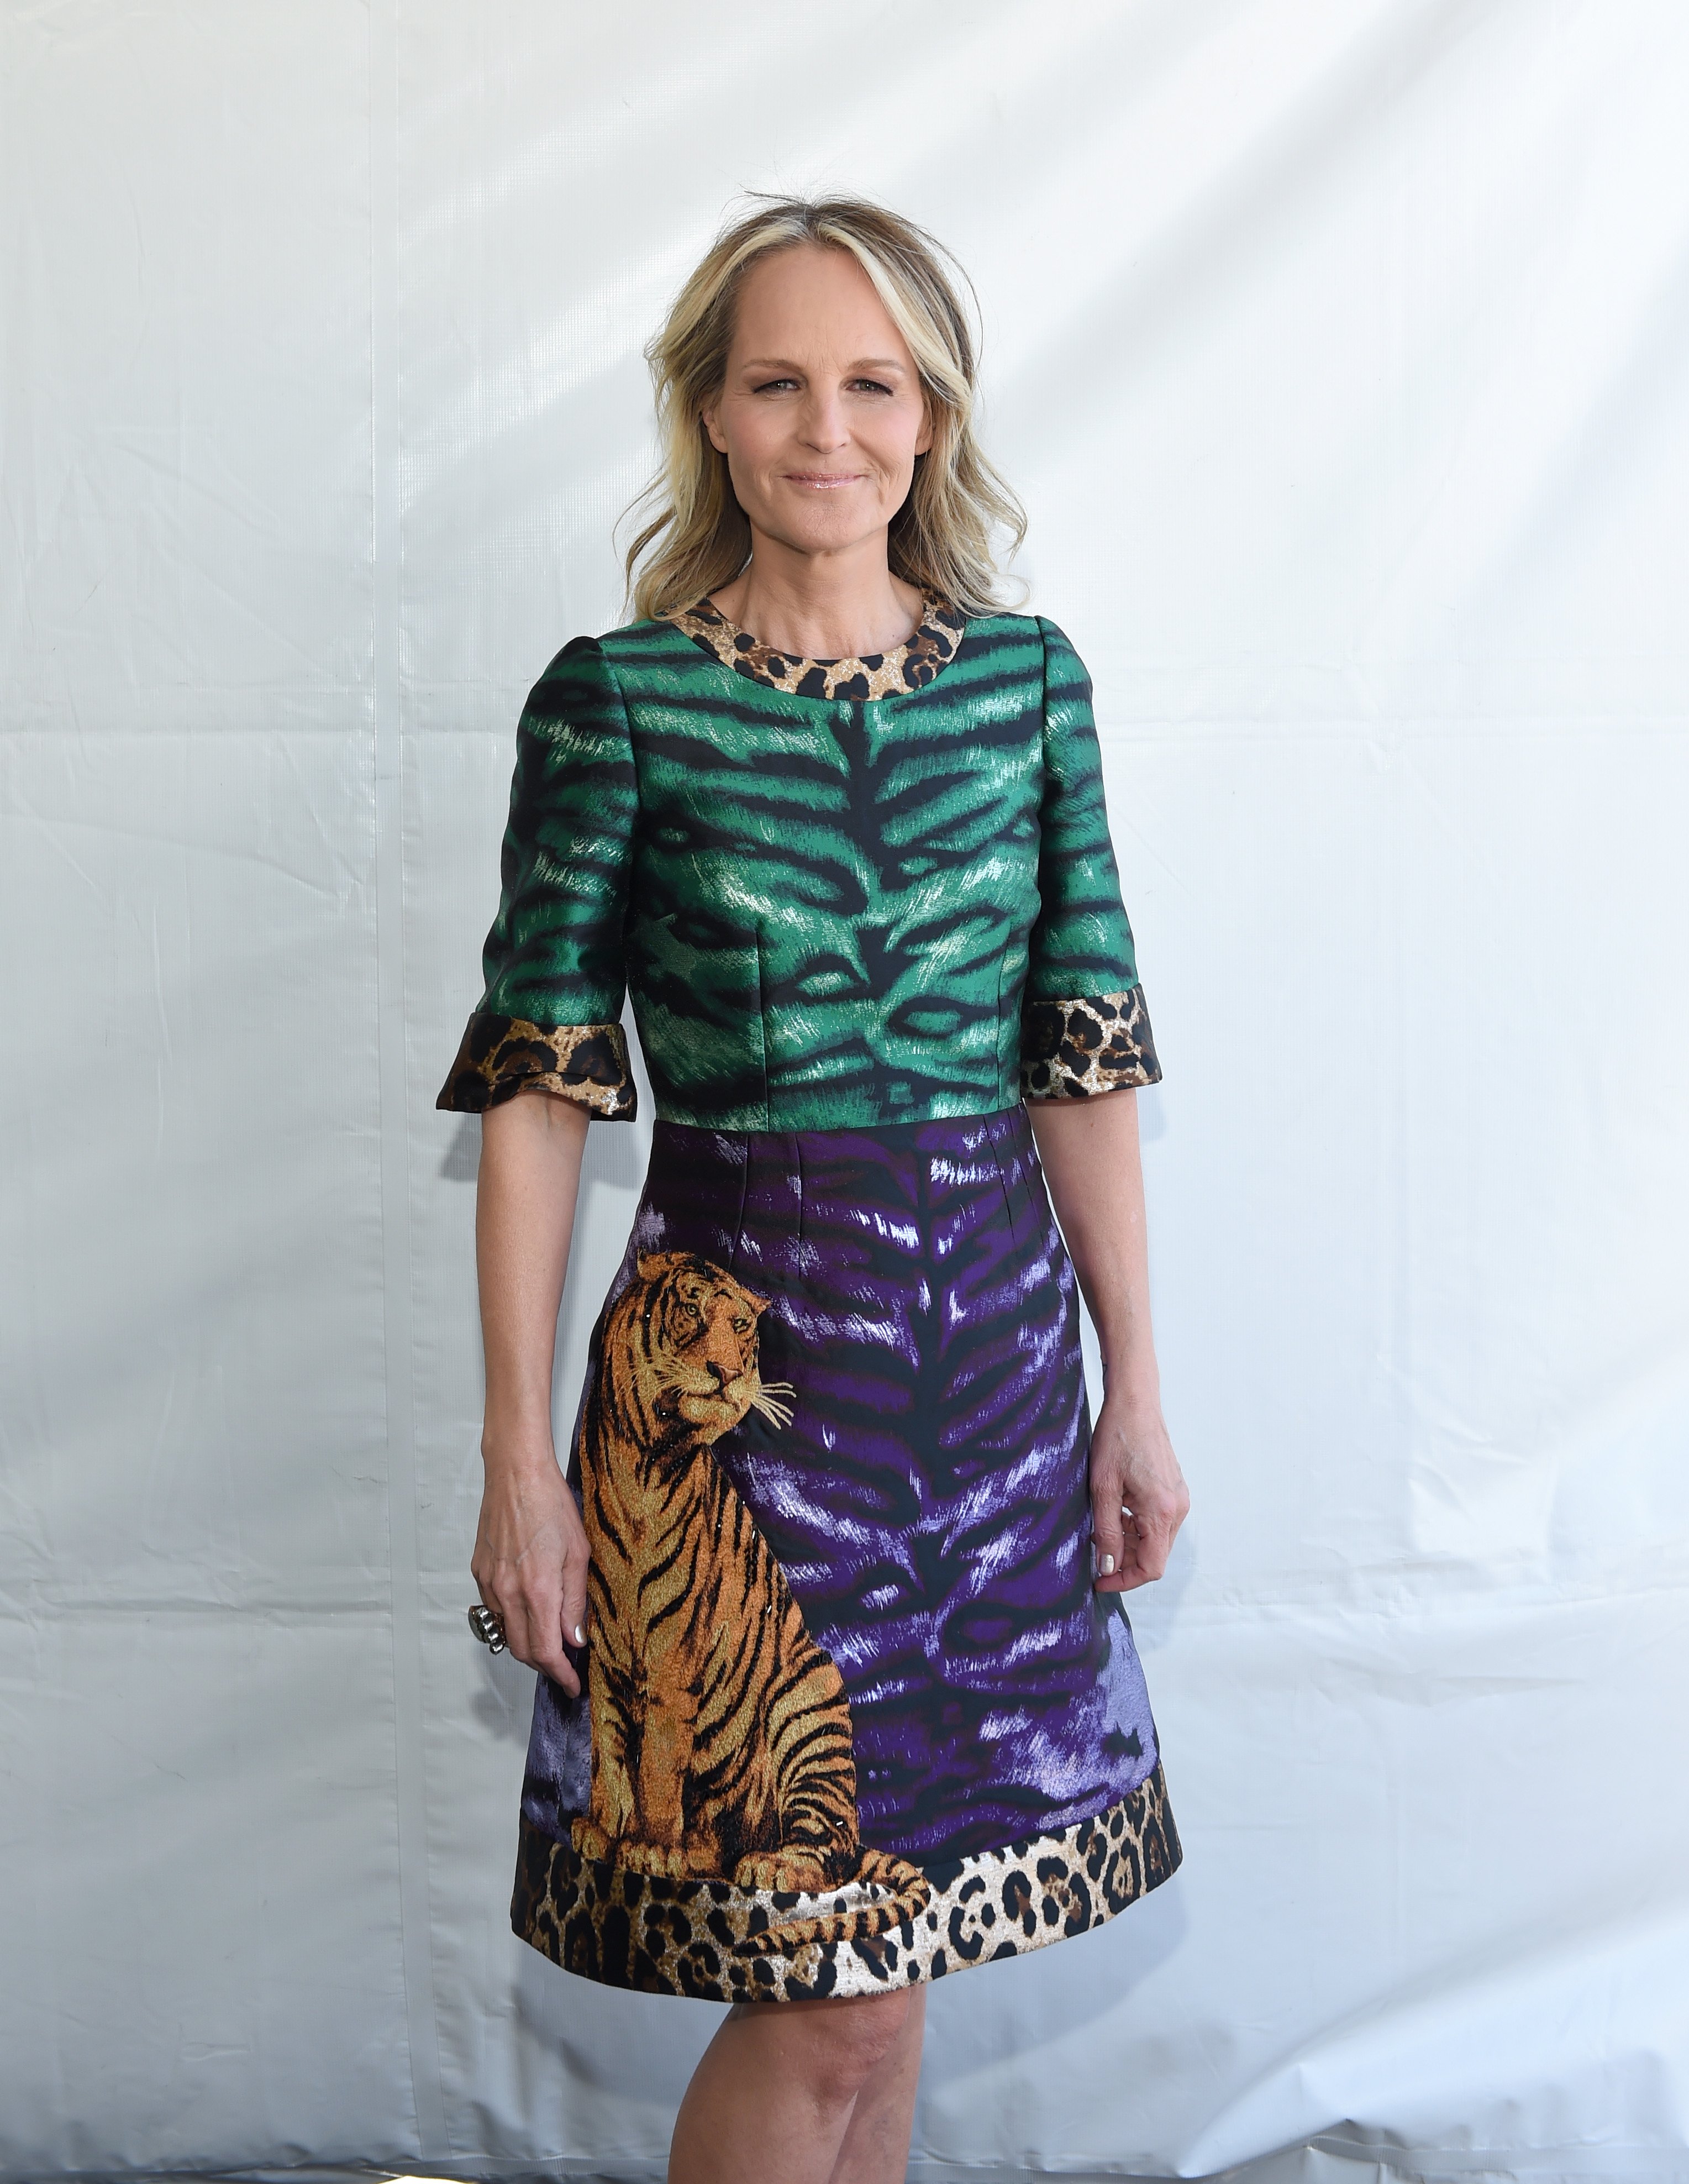 Helen Hunt at the 2022 Film Independent Spirit Awards on March 6, 2022 | Source: Getty Images